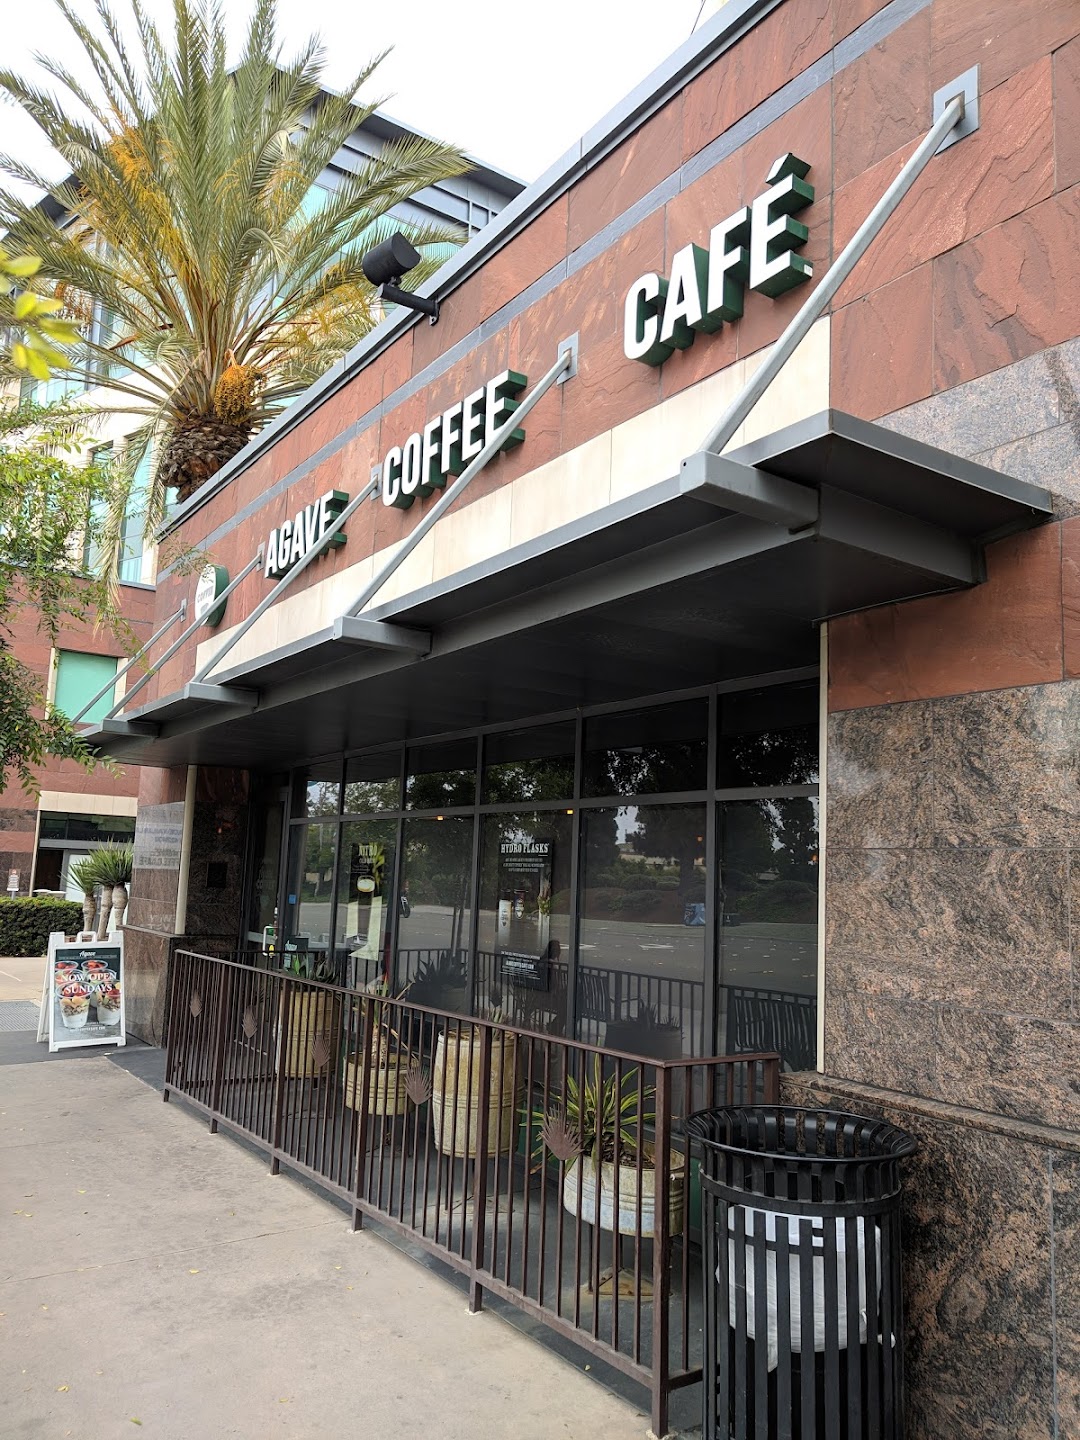 Agave Coffee And Cafe